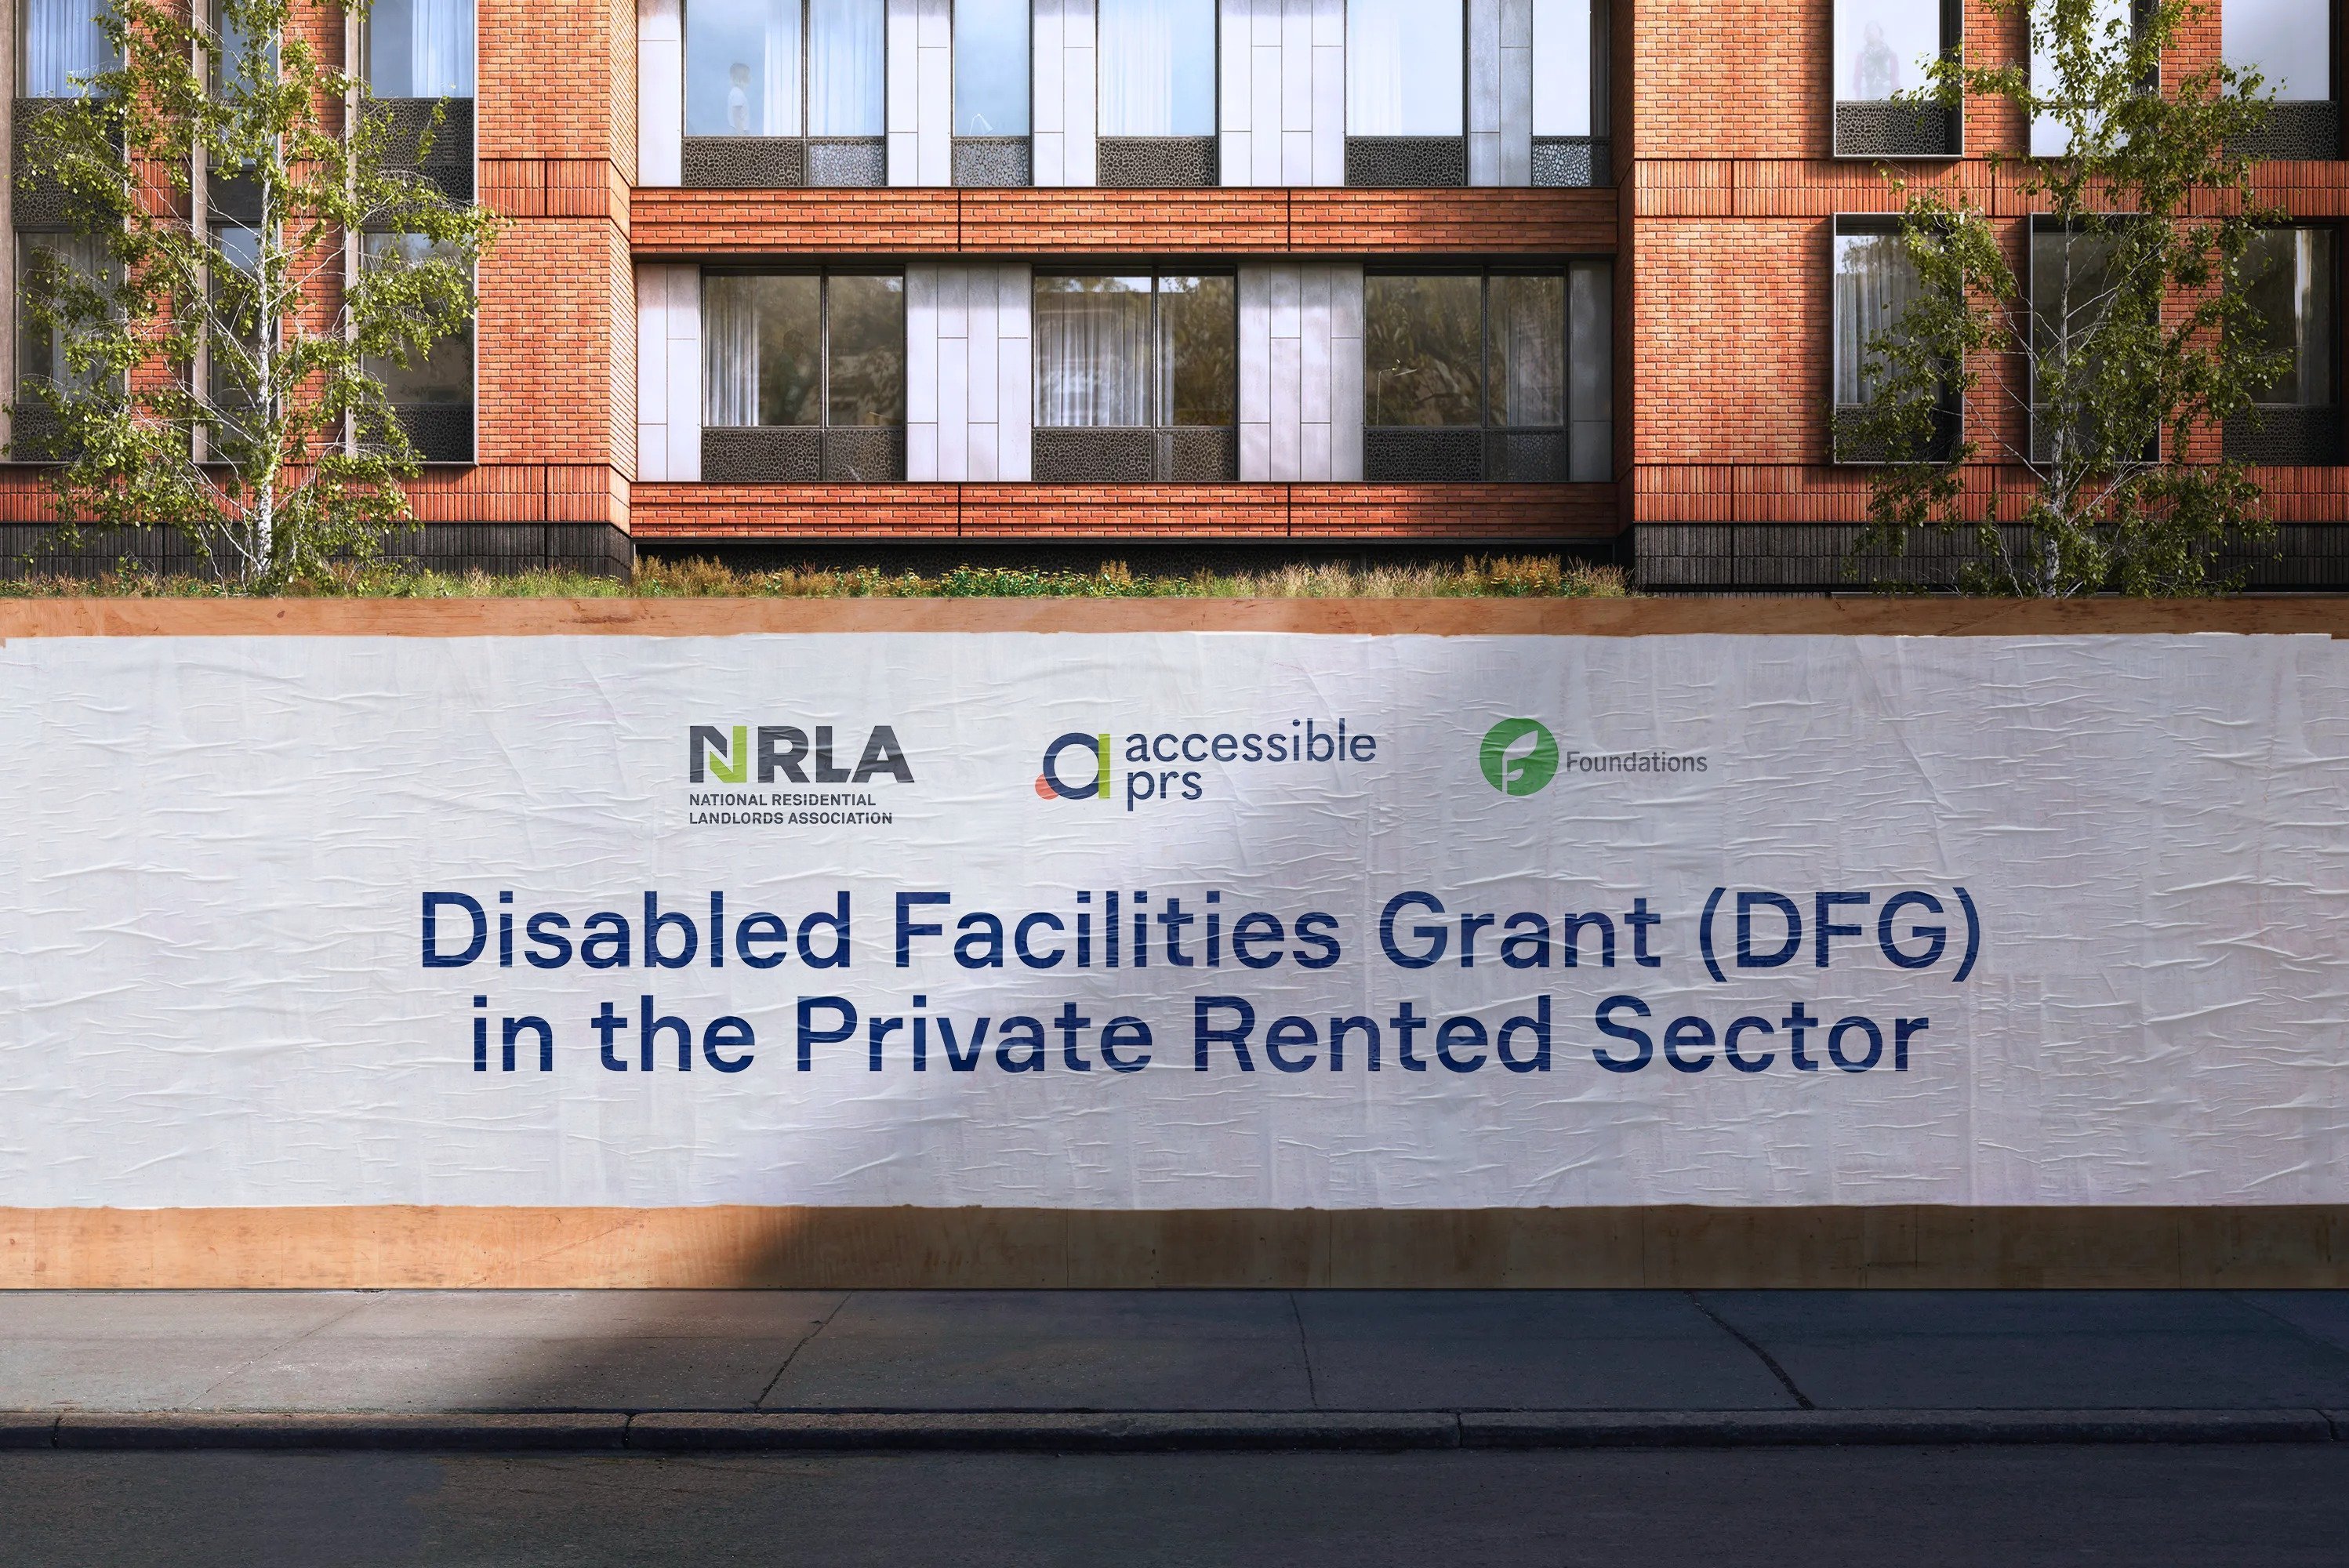 Disabled Facilities Grant in the Private Rented Sector